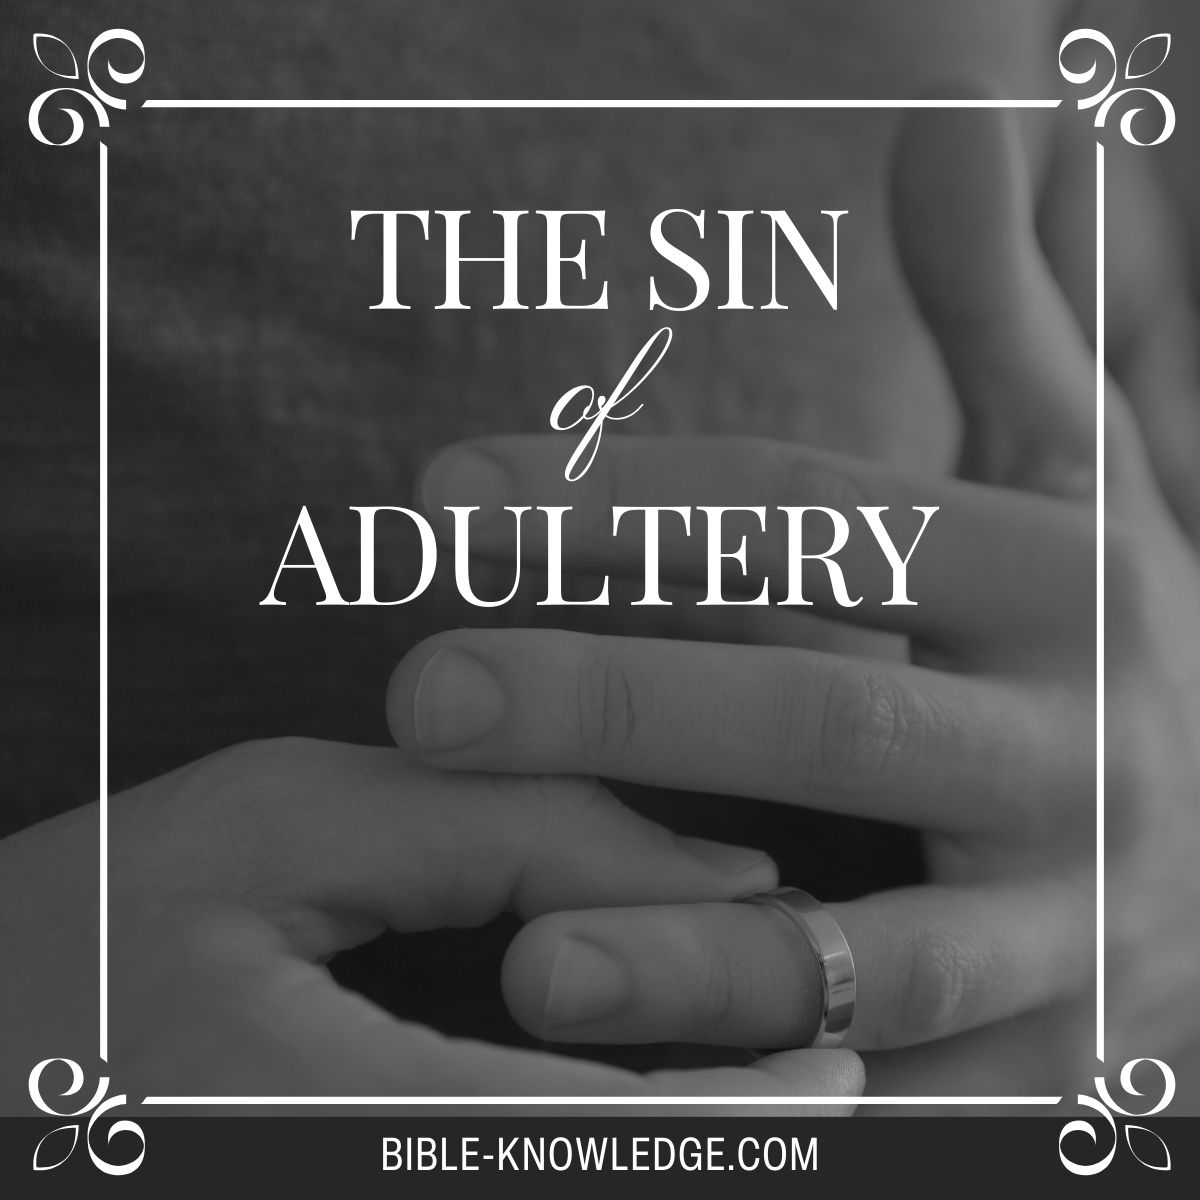 What Does The Bible Say On The Sin of Adultery